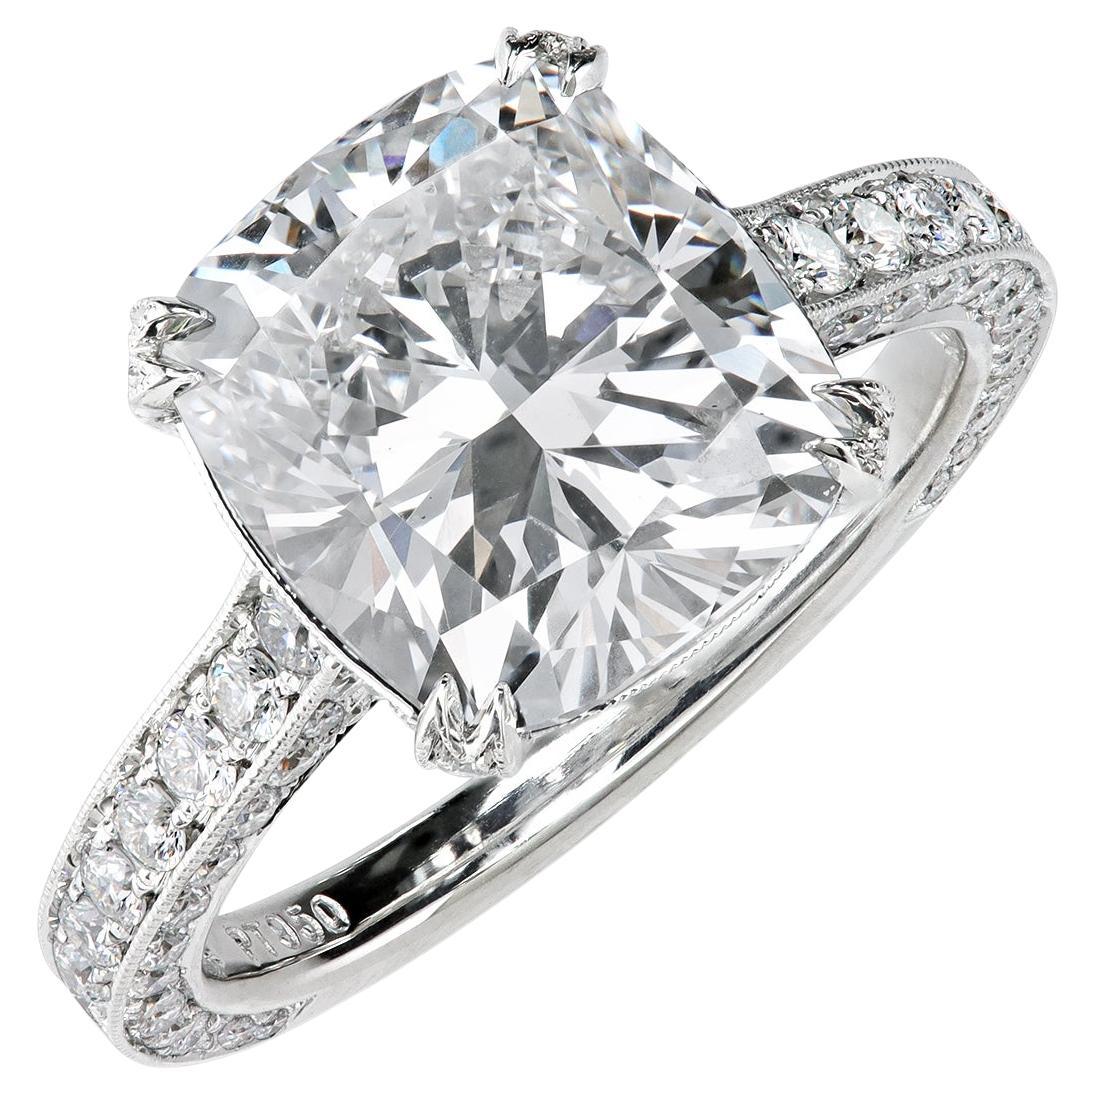 For Sale:  Leon Mege platinum engagement ring with certified cushion diamond